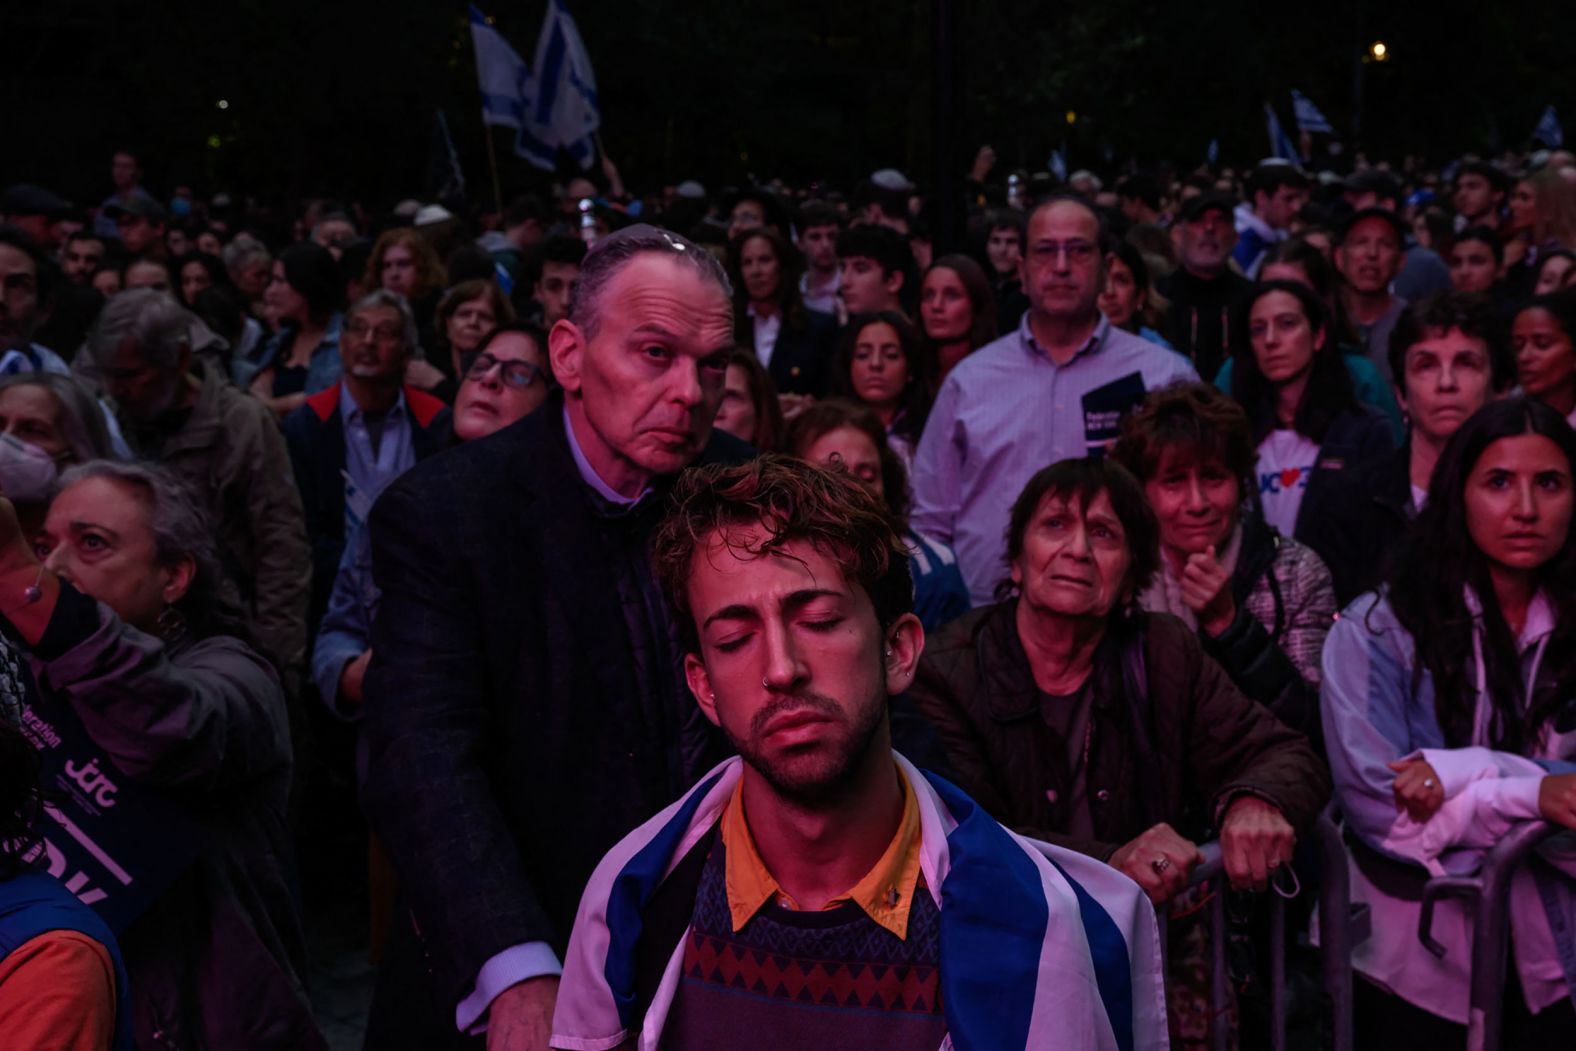 People in New York City attend a "Stand with Israel" vigil and rally on Tuesday, October 10.